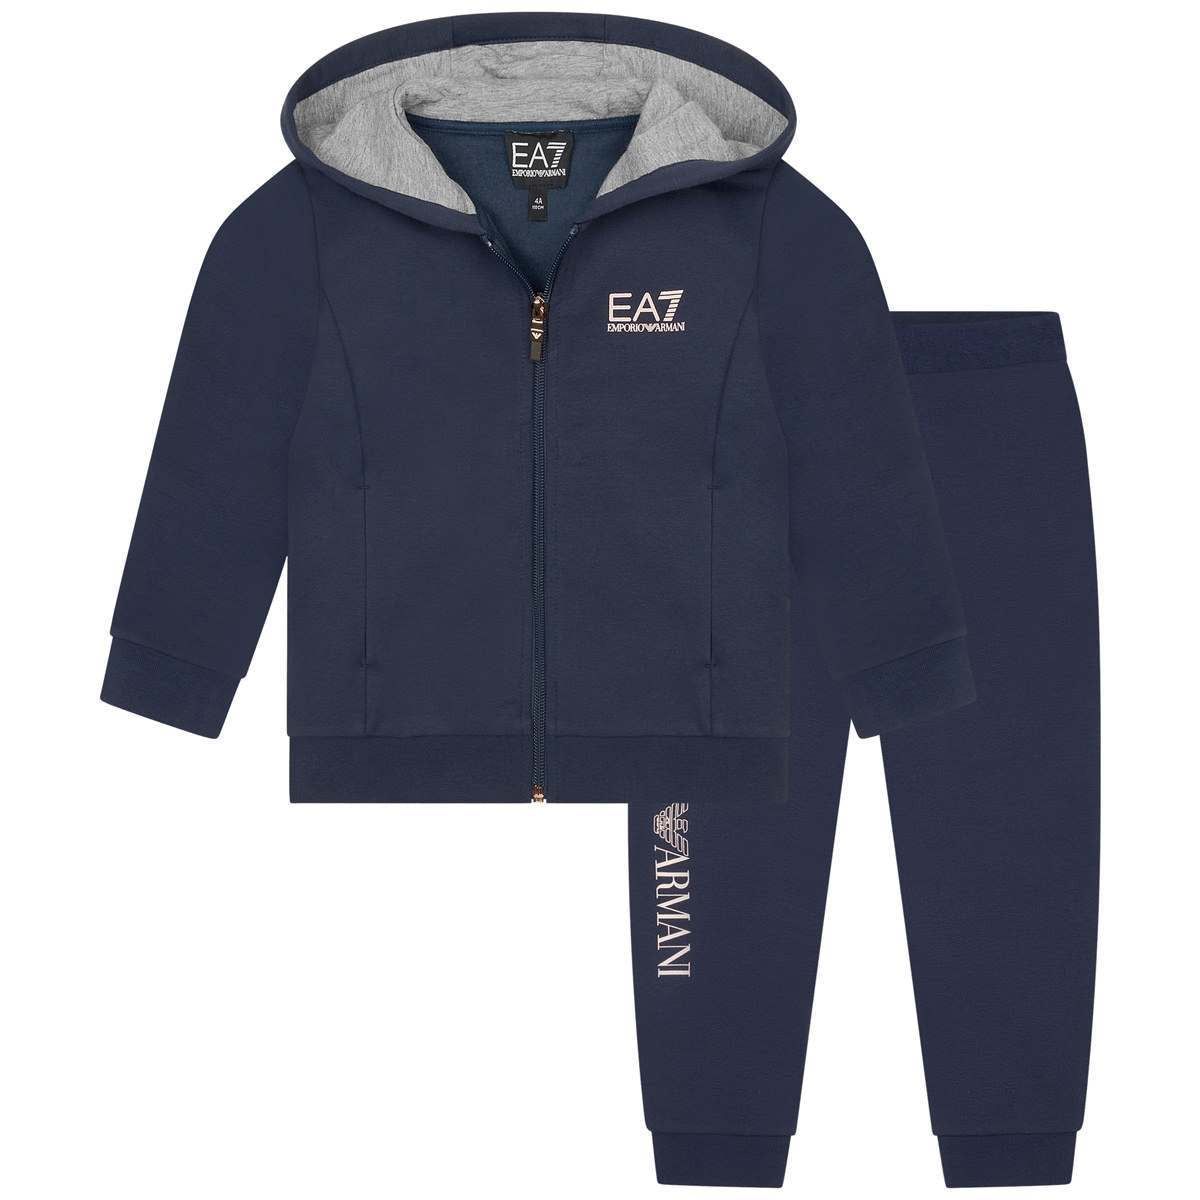 EA7 Emporio Armani Girls Navy Branded Tracksuit 
                
                
                Made in Thailand